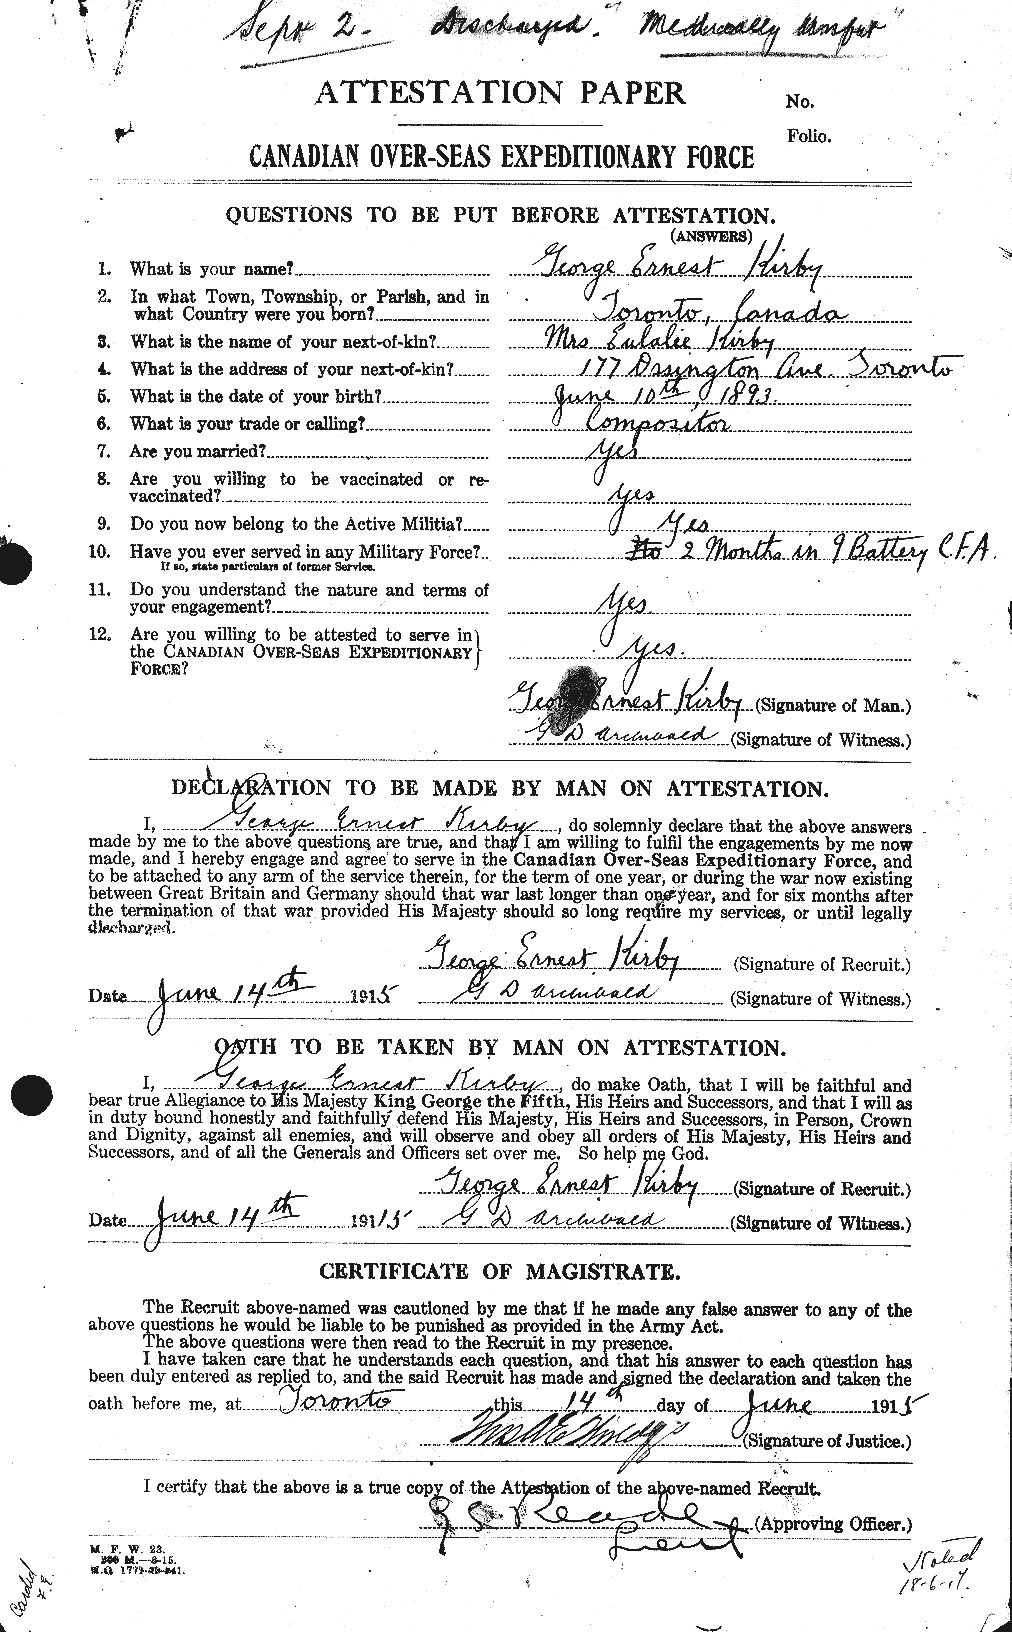 Personnel Records of the First World War - CEF 437197a